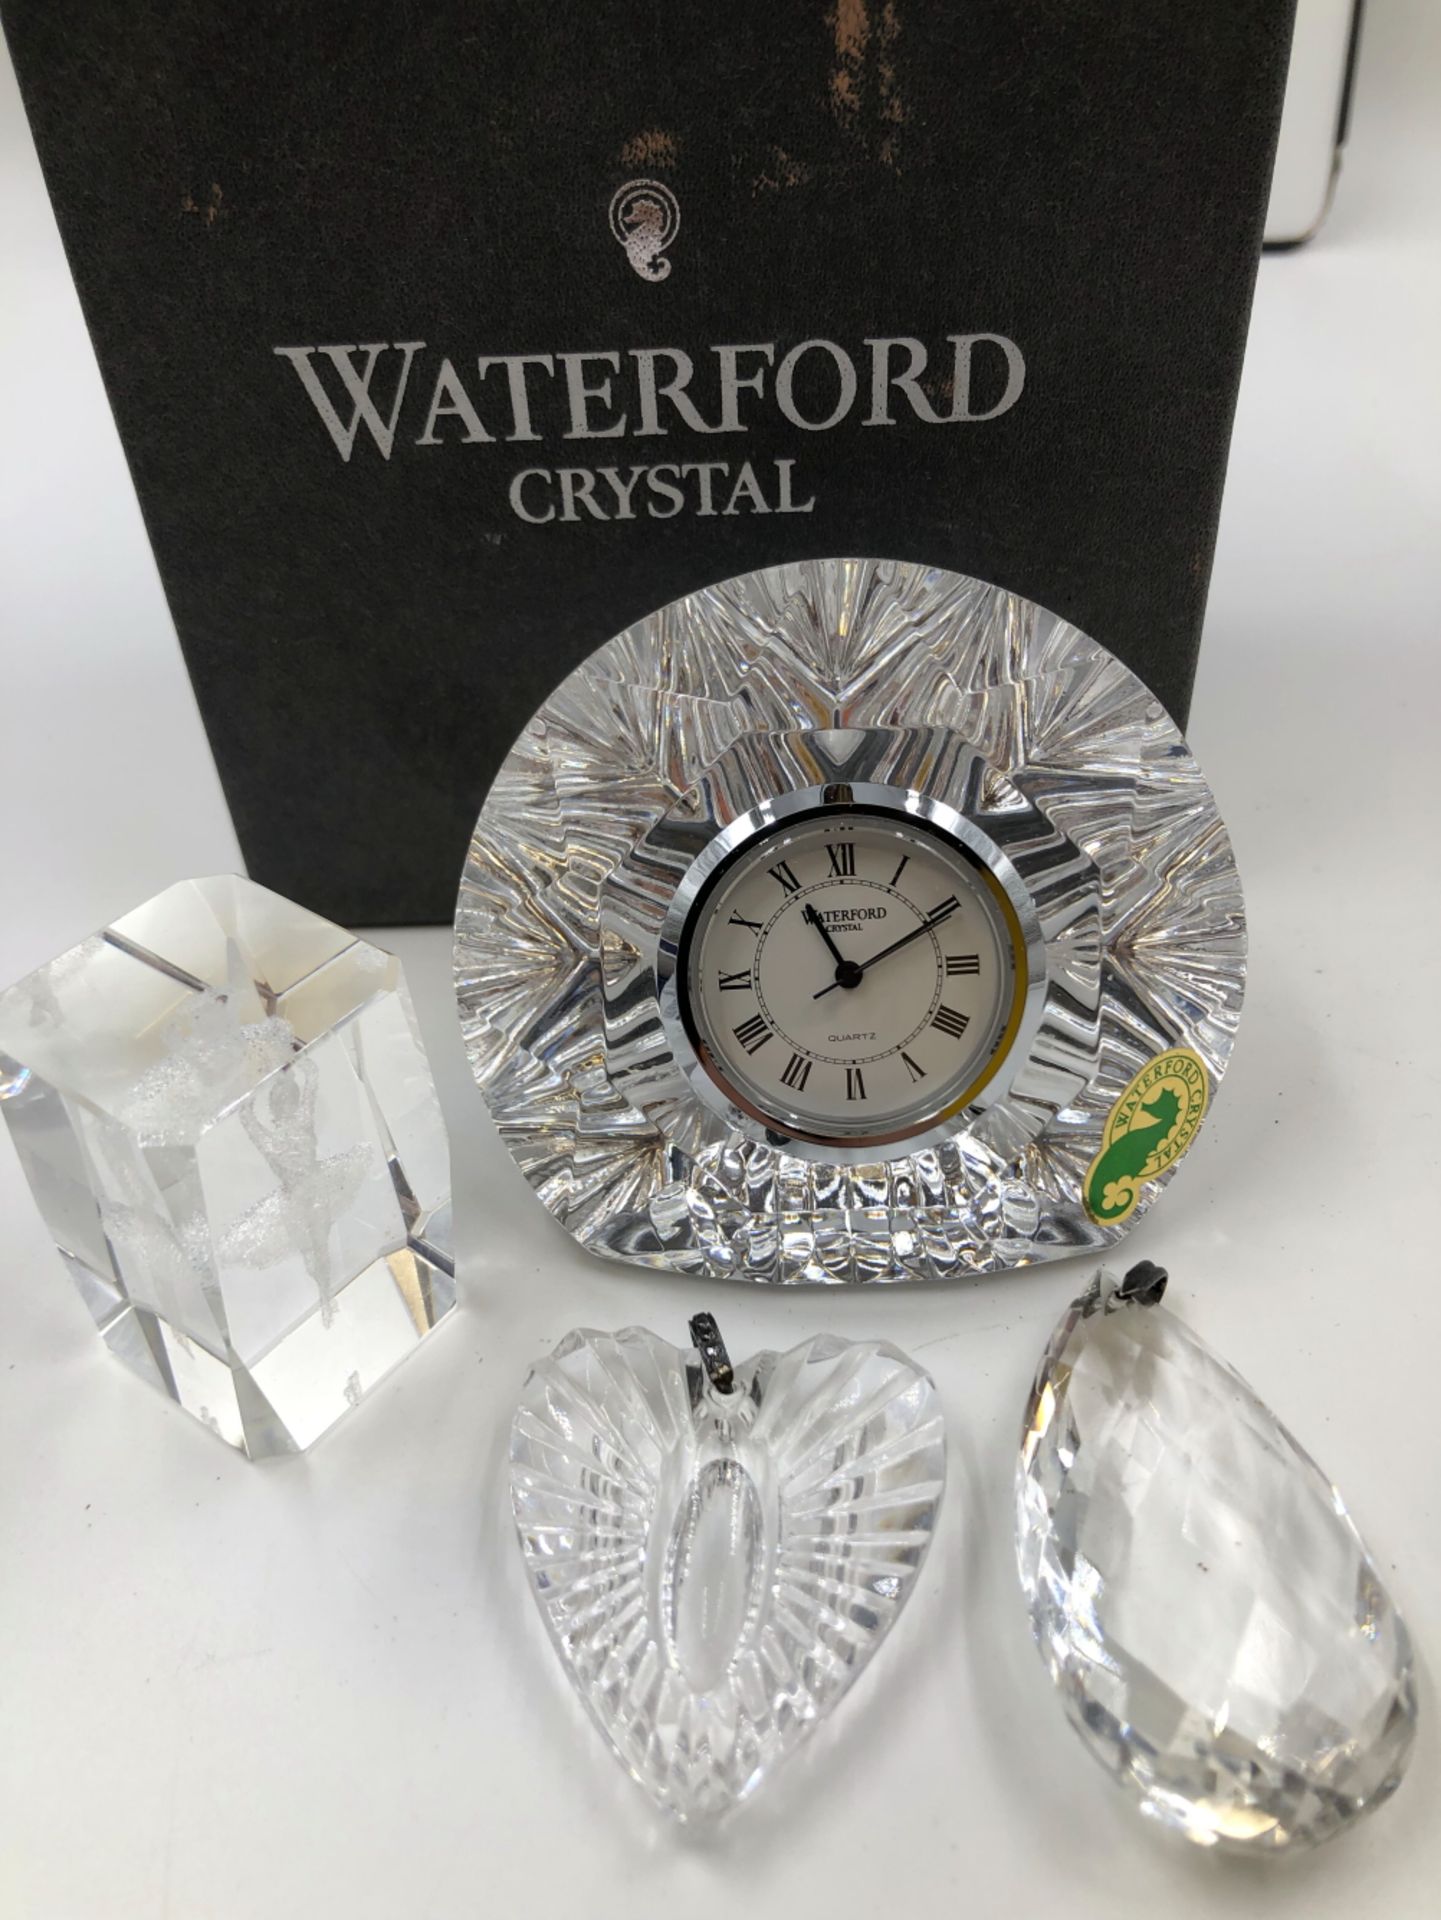 A WATERFORD CRYSTAL DESK CLOCK, A CRYSTAL HEART PENDANT AND A SIMILAR PENDANT IN A FACET CUT - Image 2 of 4